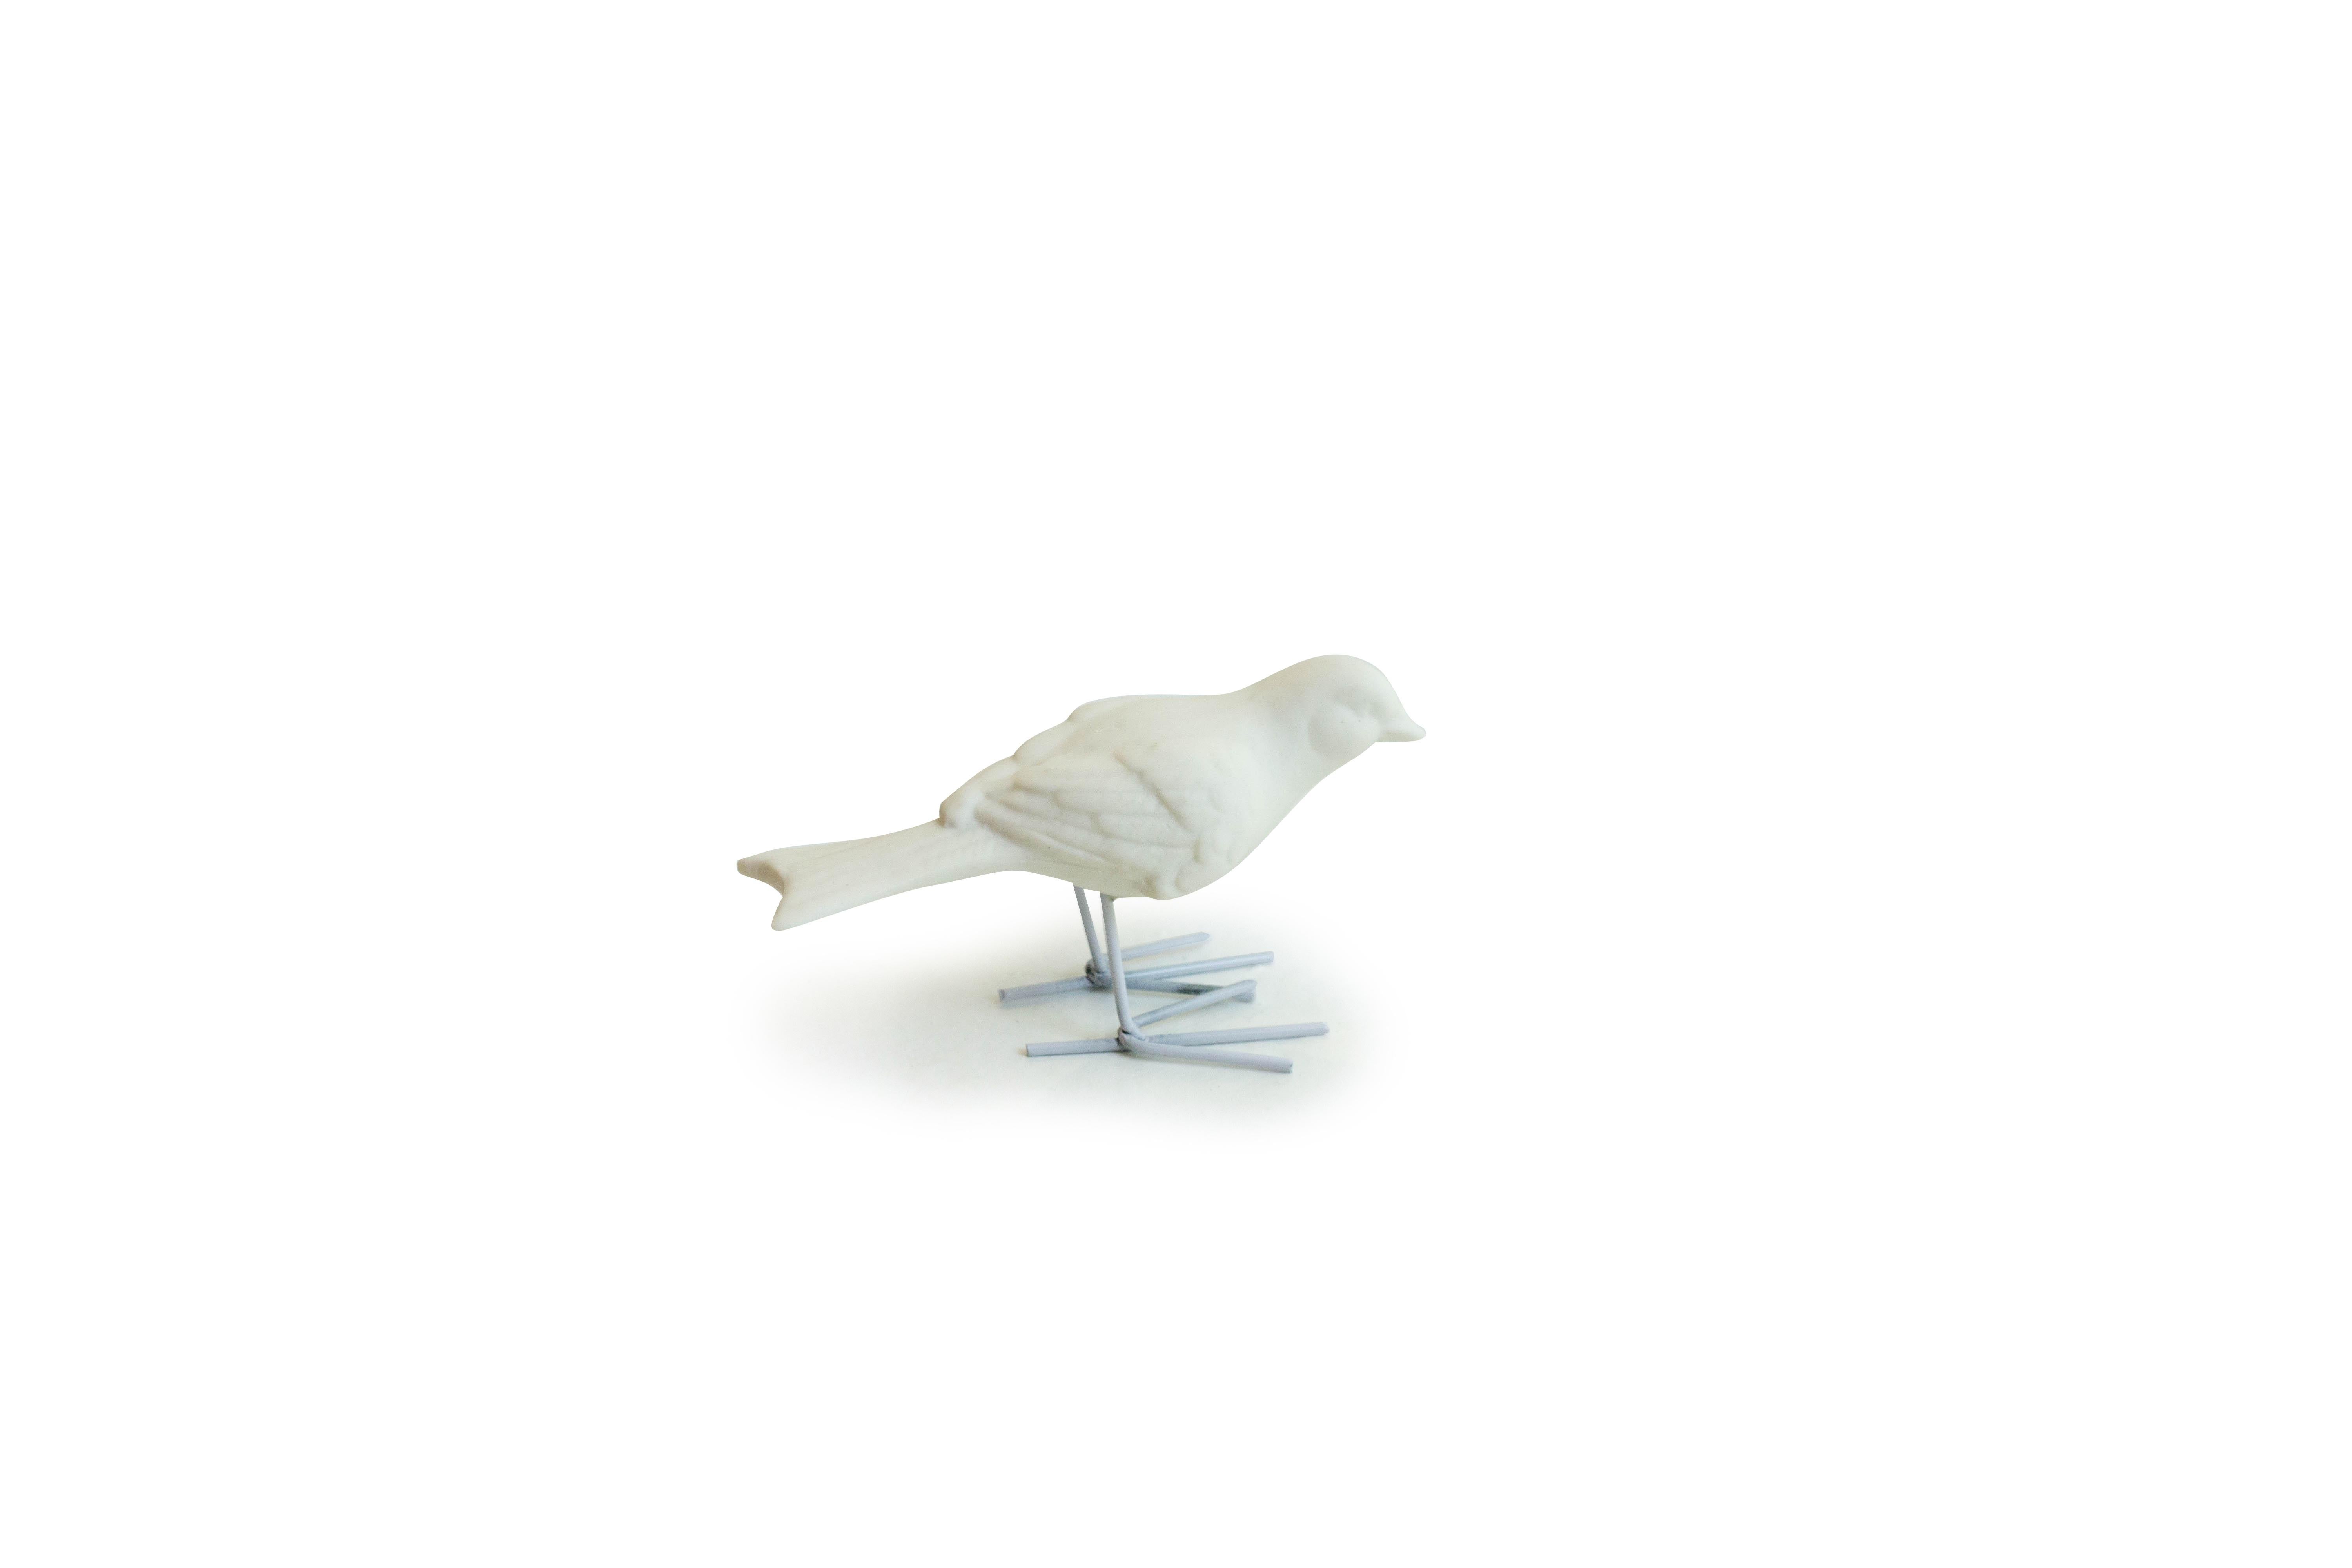 Set of 4 Unglazed White Porcelain Birds, Starlings supported by White Iron Legs  For Sale 3